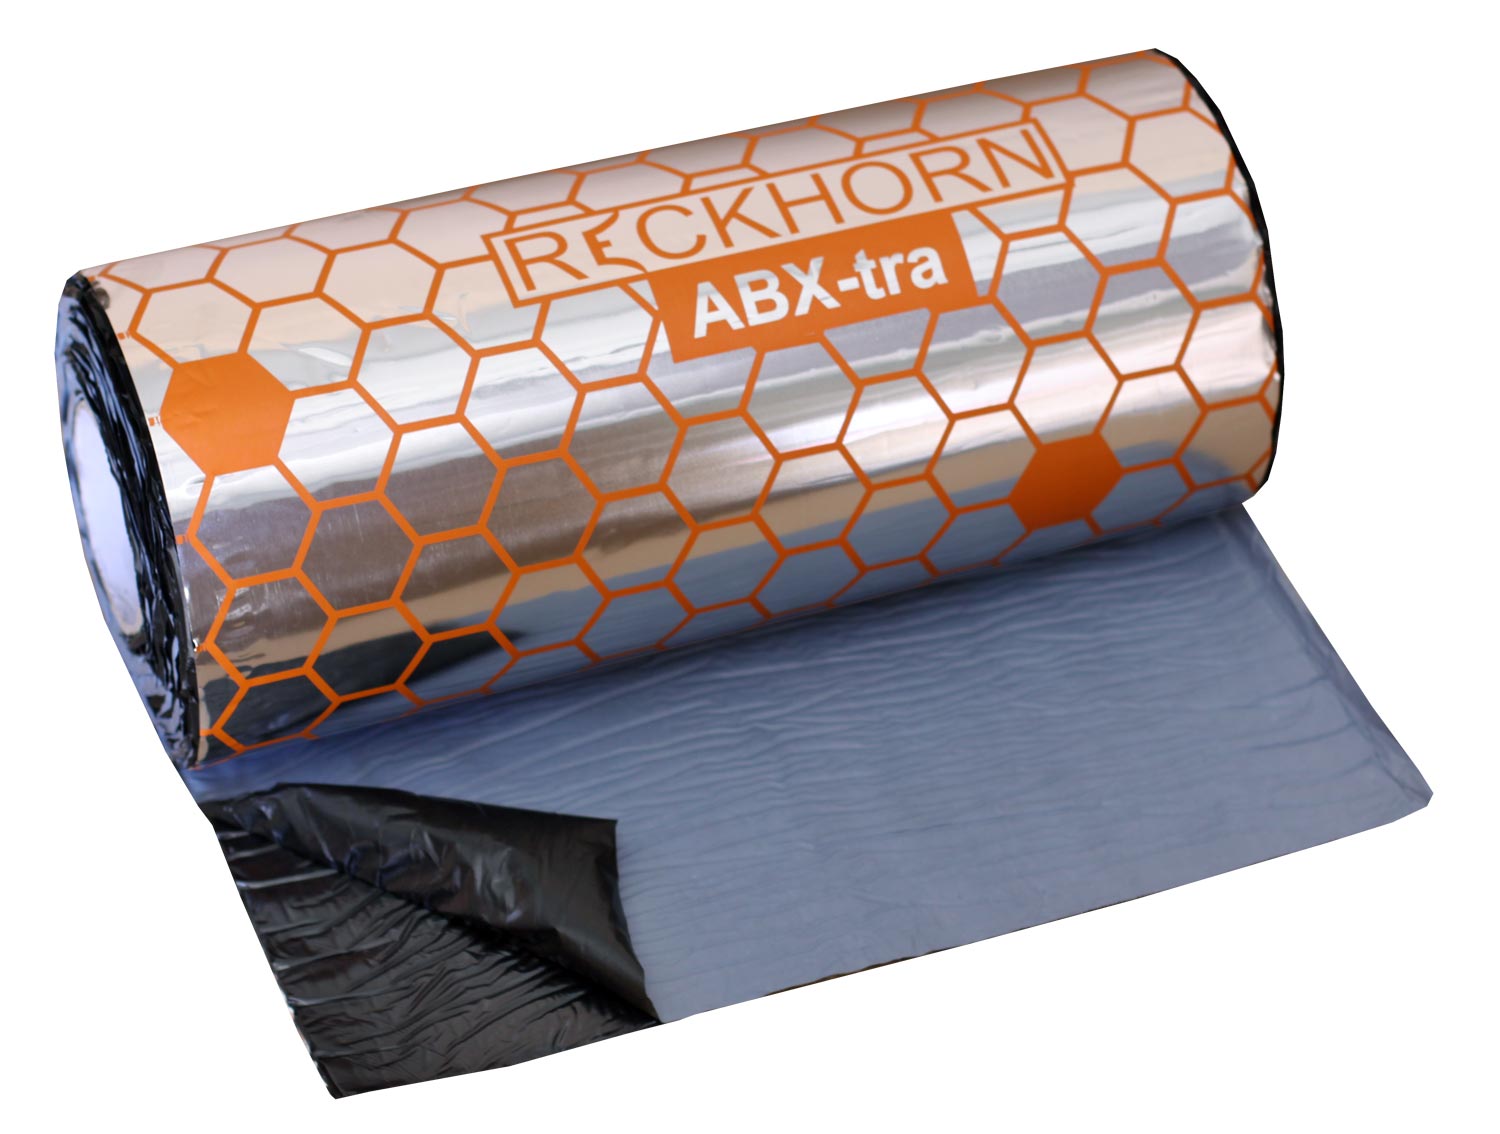 Our Alubutyl has the strongest surface adhesion and no bitumen smell. The  Reckhorn DV-10 is self-adhesive and suitable ideal for vibration and sound  insulation.